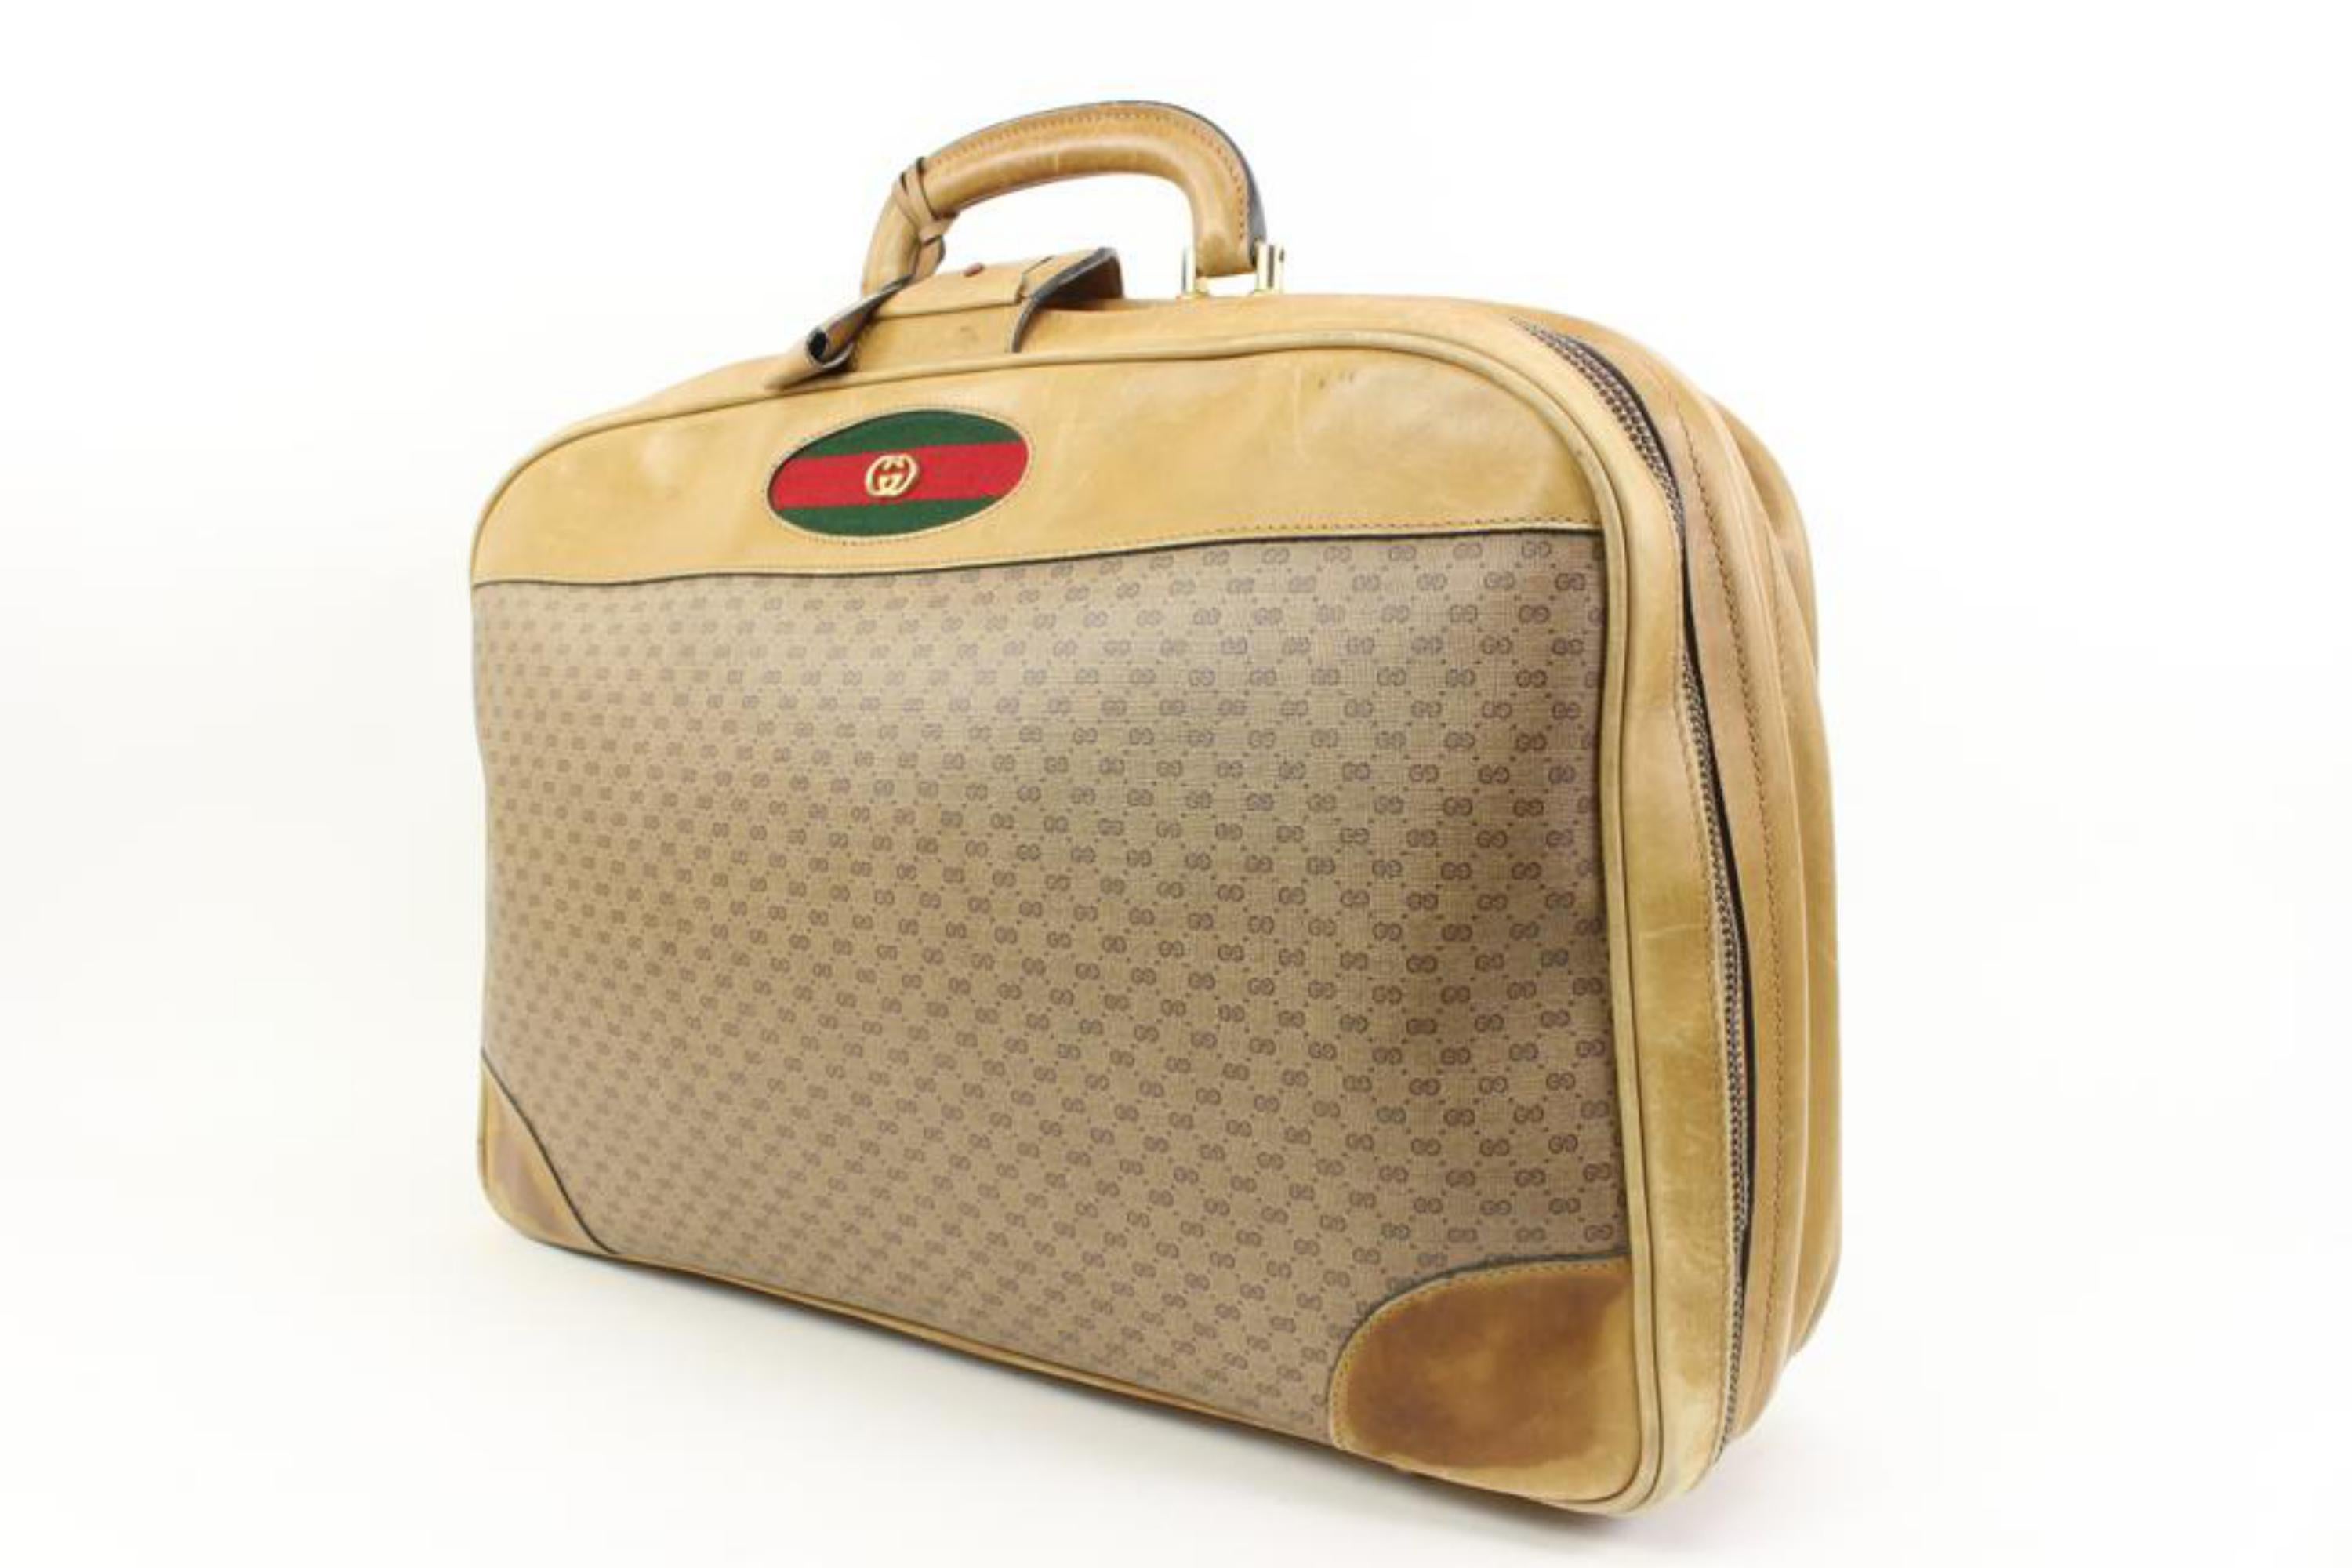 Gucci Large Beige Micro GG Web Suitcase Luggage Soft Trunk 39g311s
Date Code/Serial Number: 
Measurements: Length:  21.5